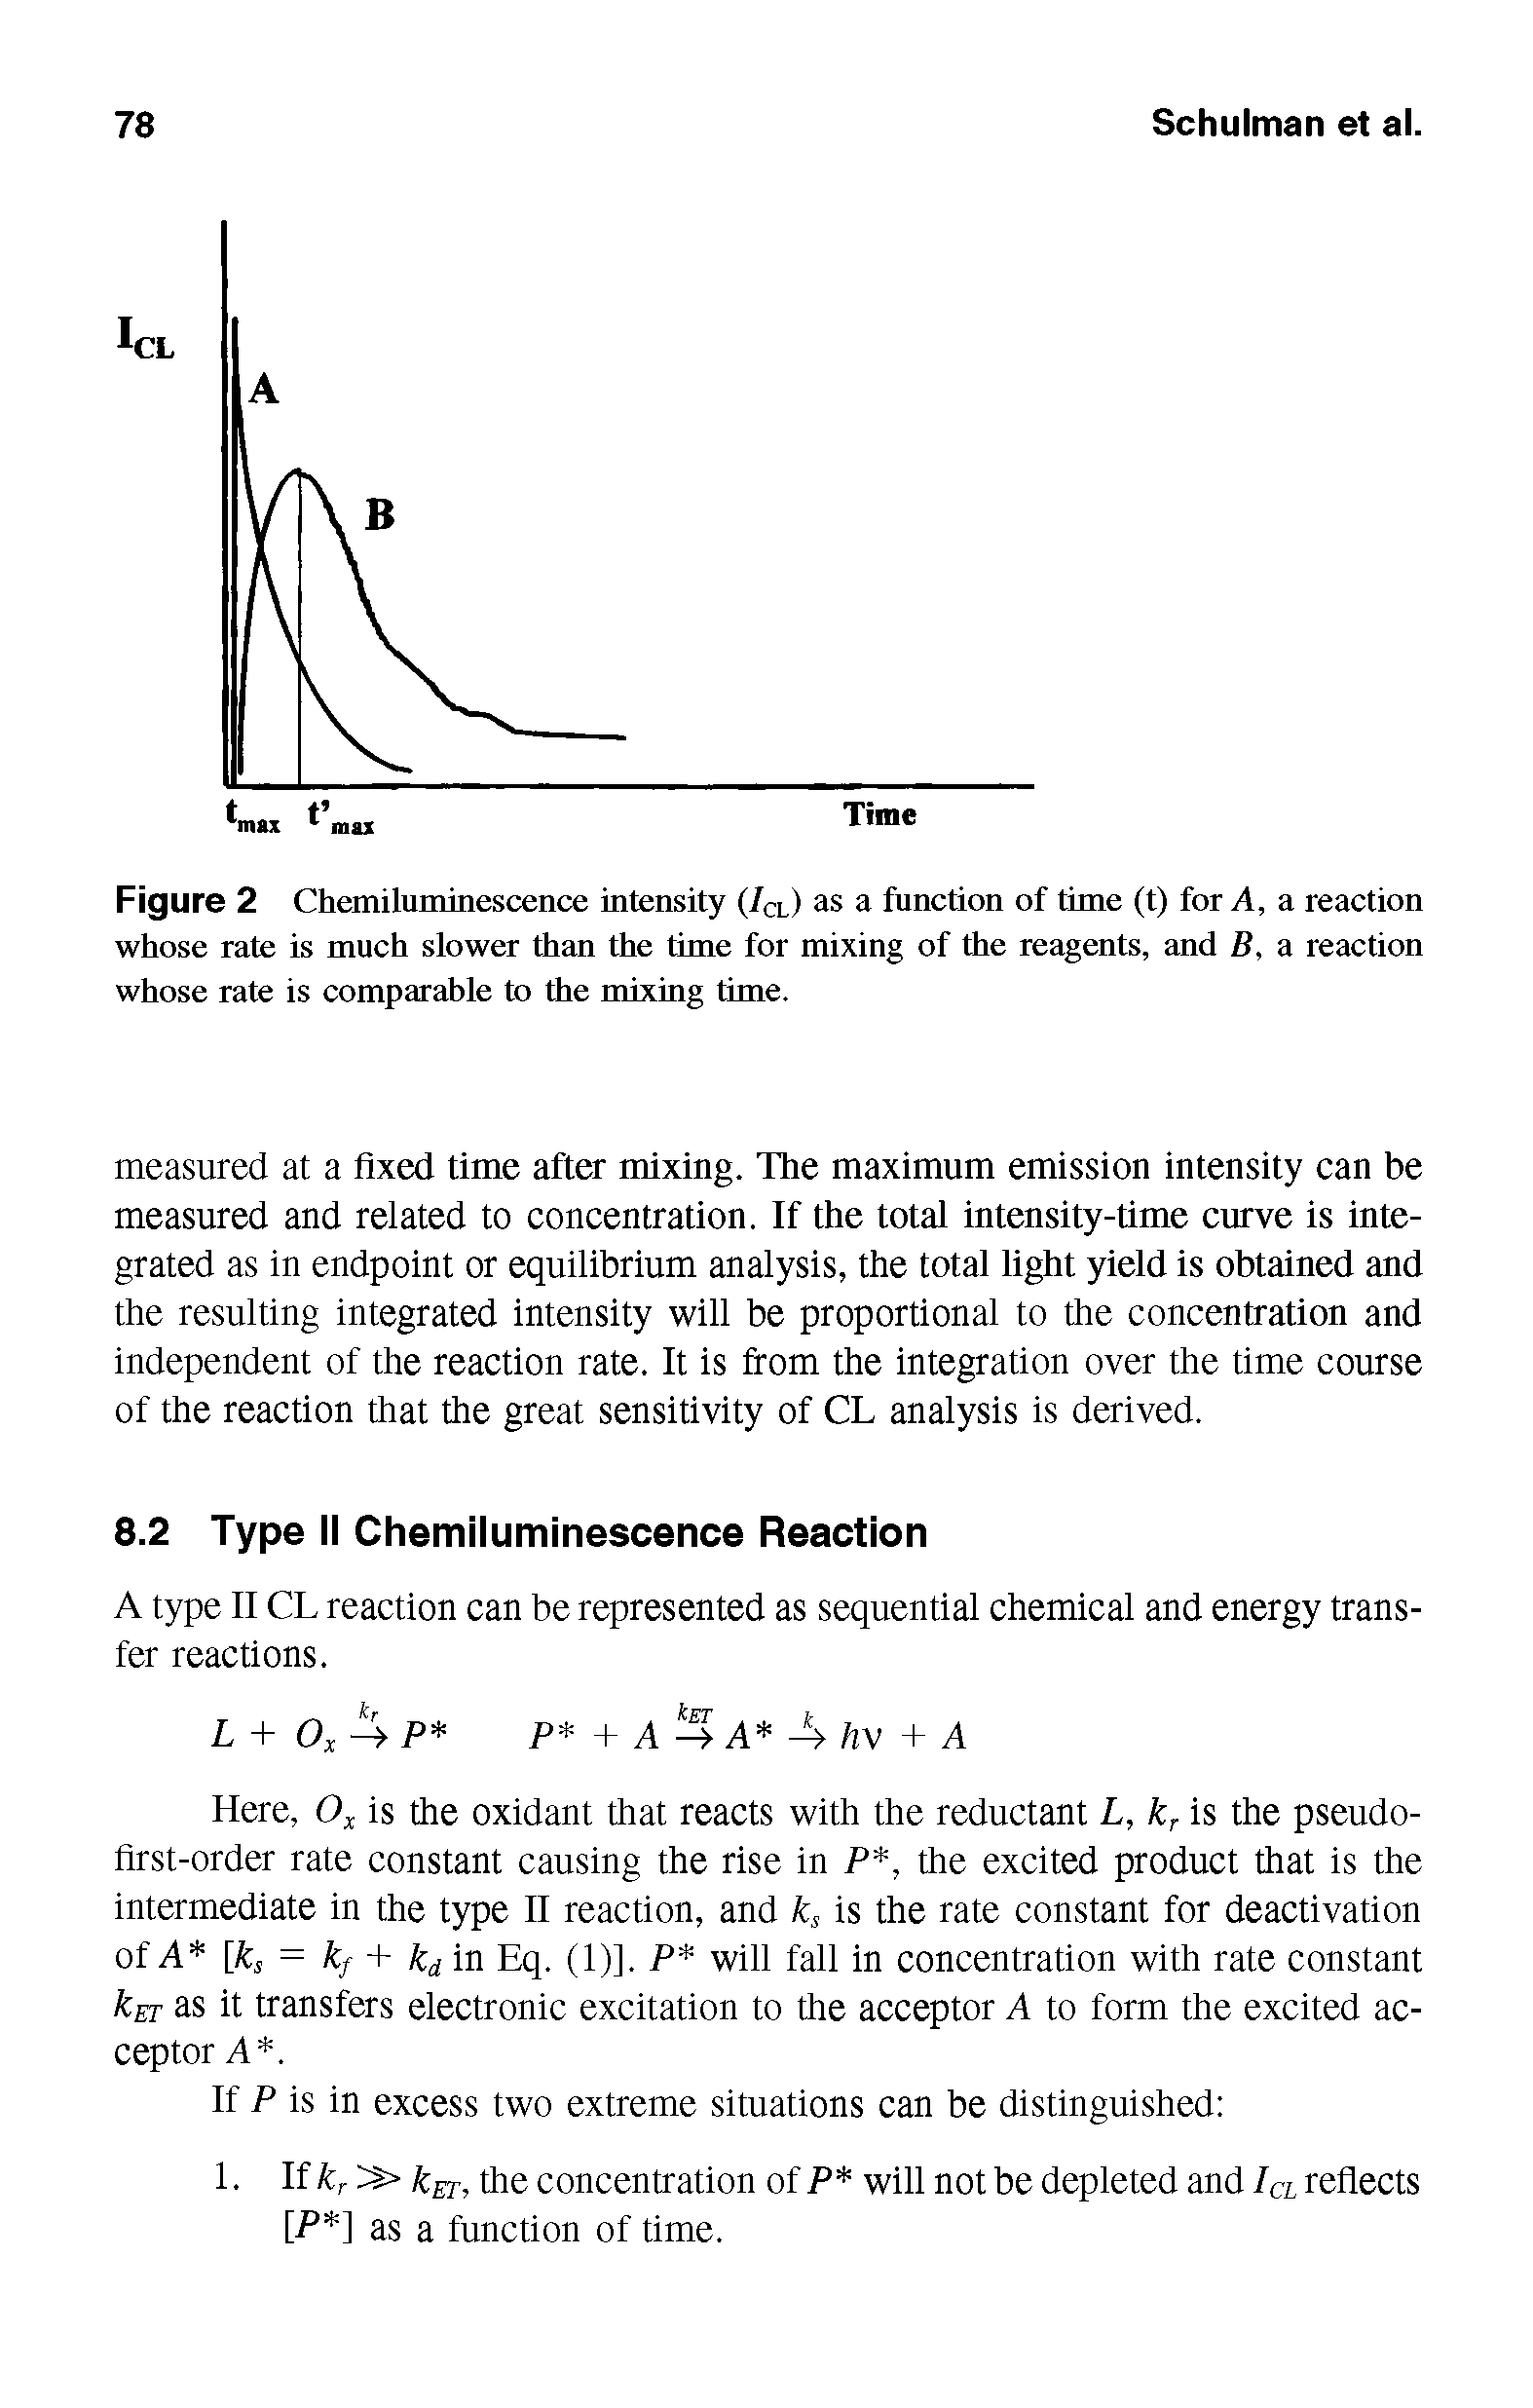 Figure 2 Chemiluminescence intensity (/CL) as a function of time (t) for A, a reaction whose rate is much slower than the time for mixing of the reagents, and B, a reaction whose rate is comparable to the mixing time.